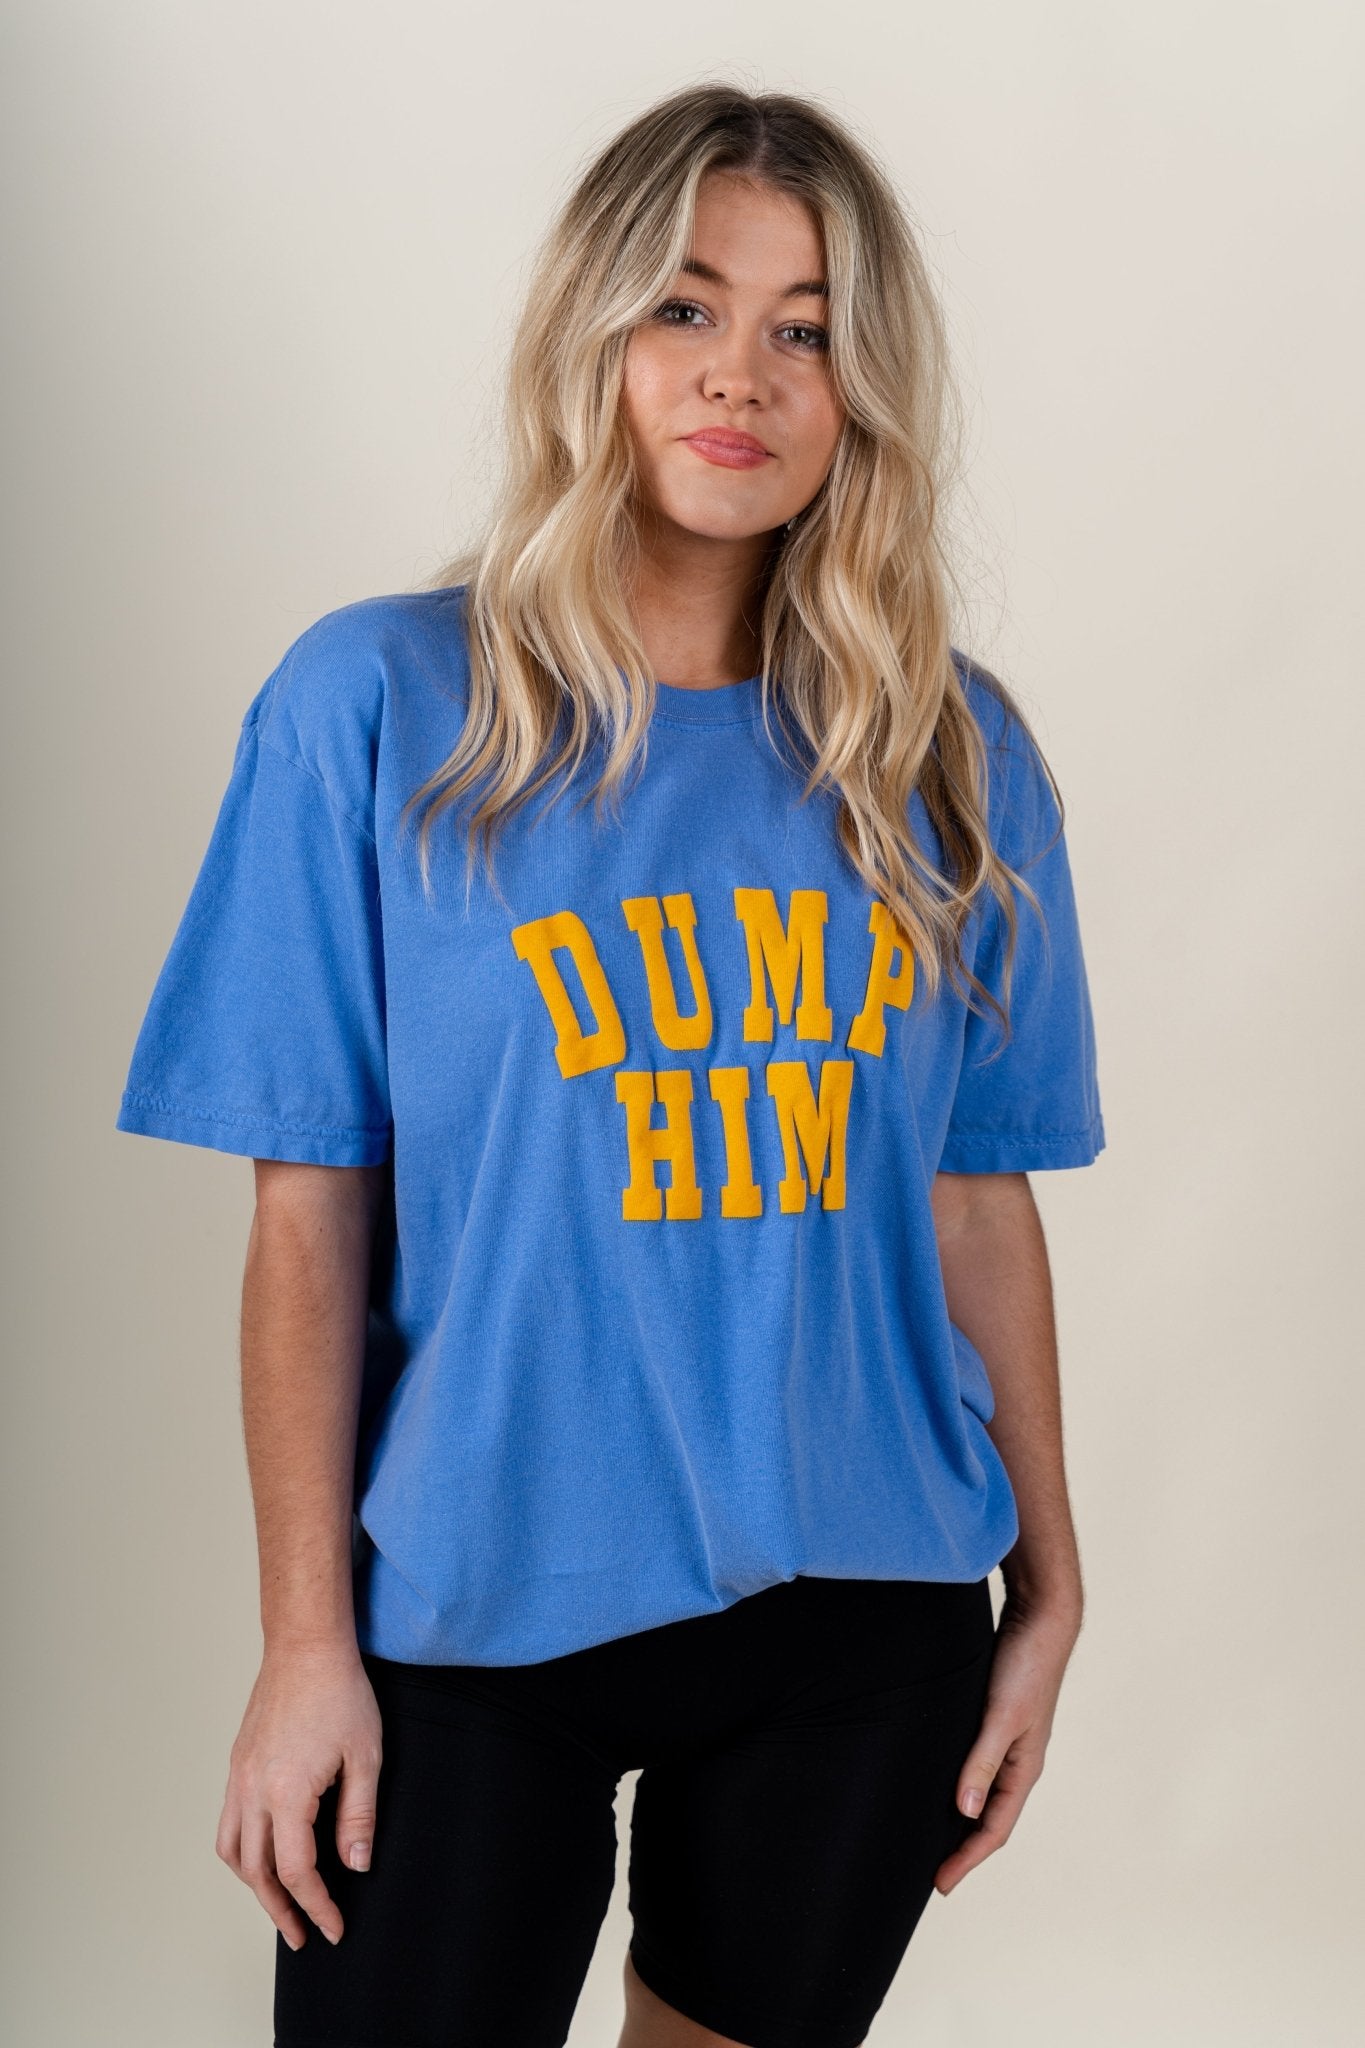 Dump him t-shirt deep forte - Cute T-shirt - Trendy Graphic T-Shirts at Lush Fashion Lounge Boutique in Oklahoma City